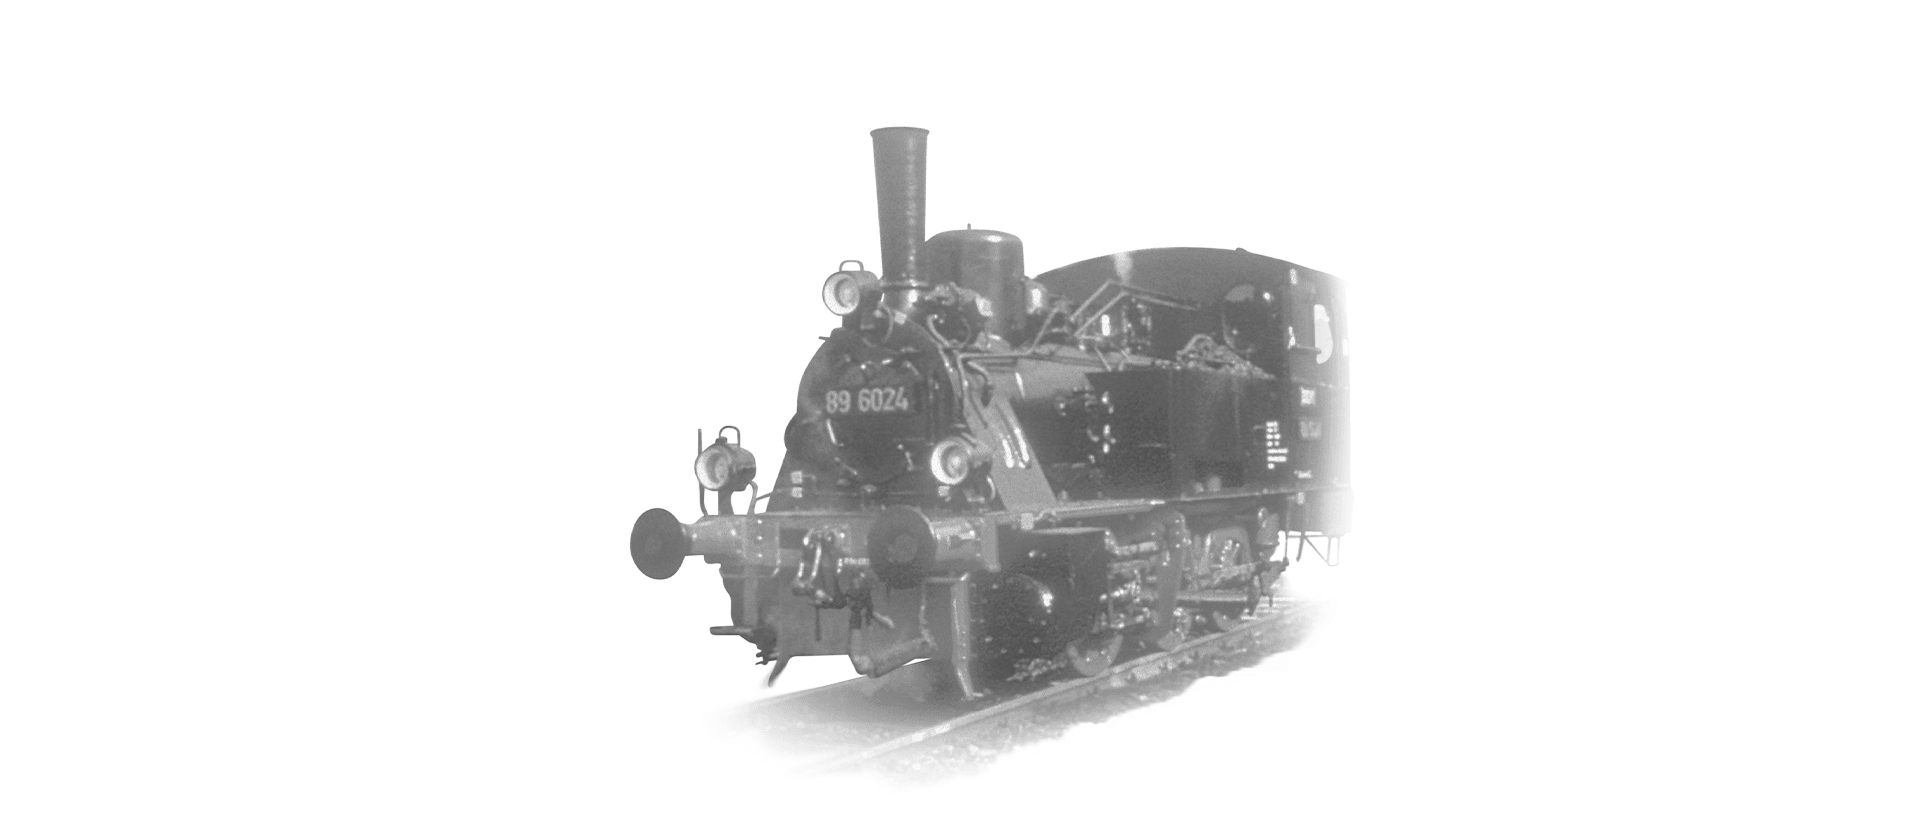 The locomotive 89-6024 is coming towards the camera in black and white